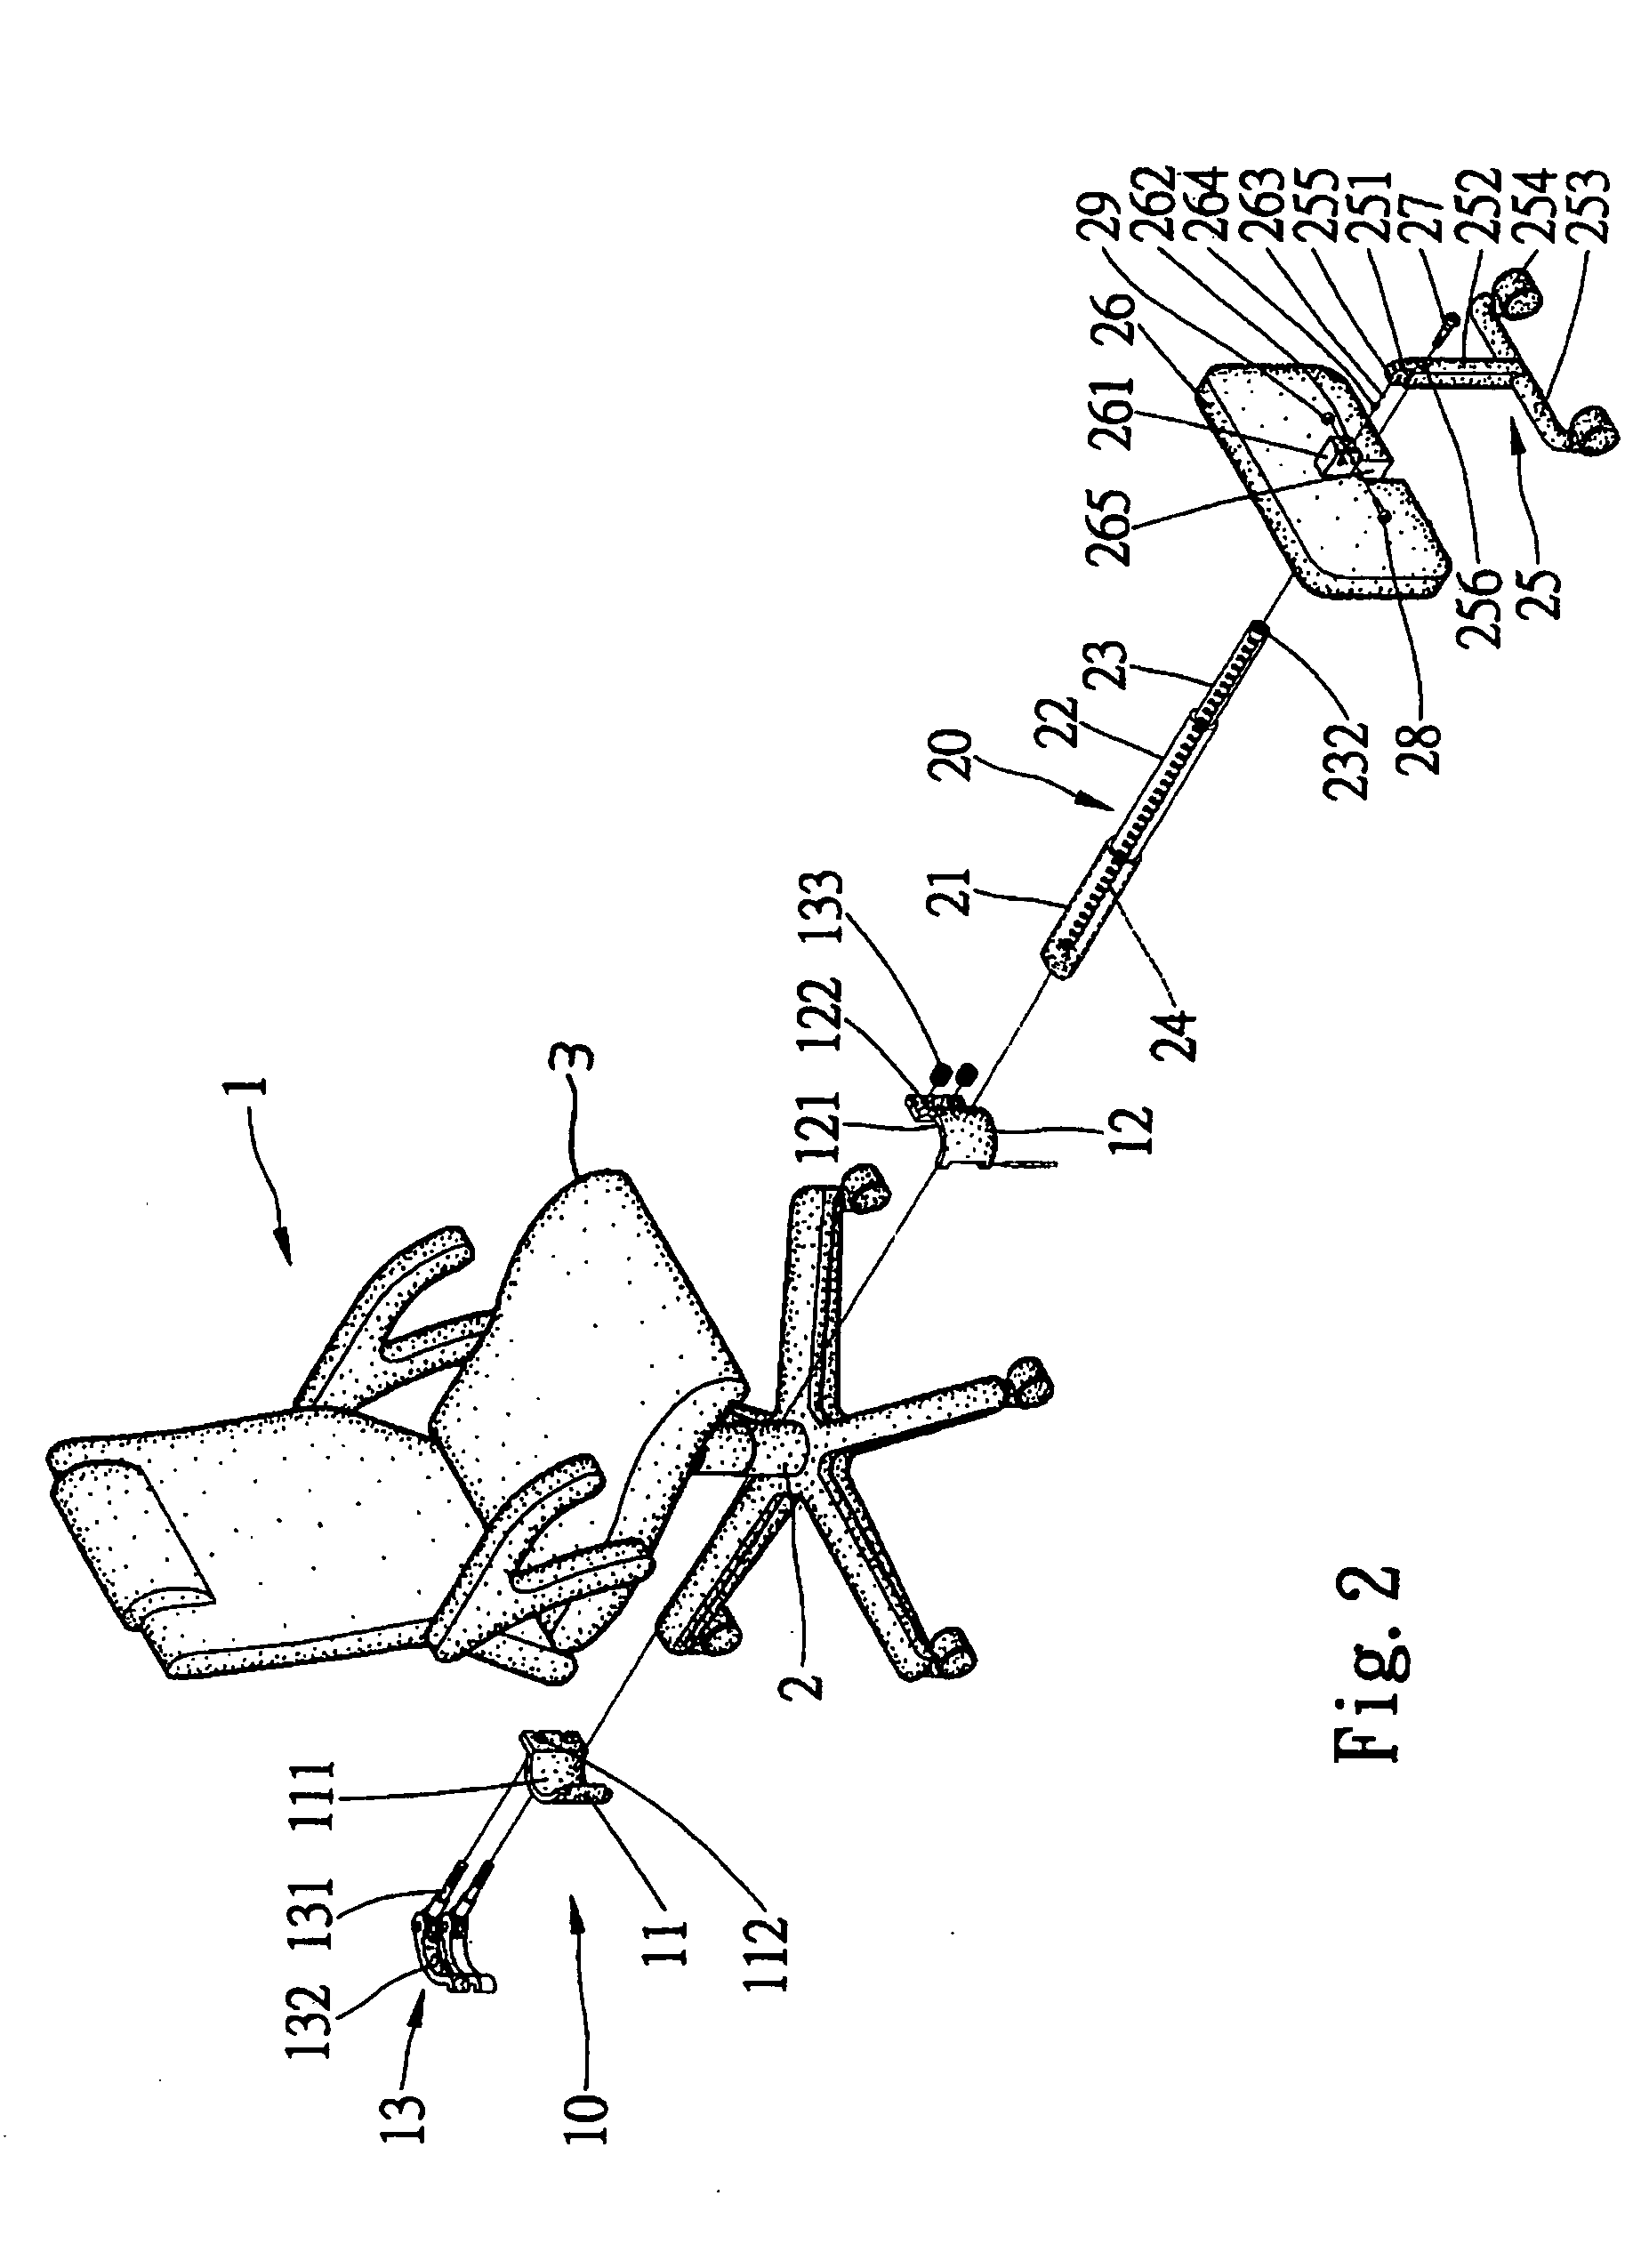 Stool apparatus for chair